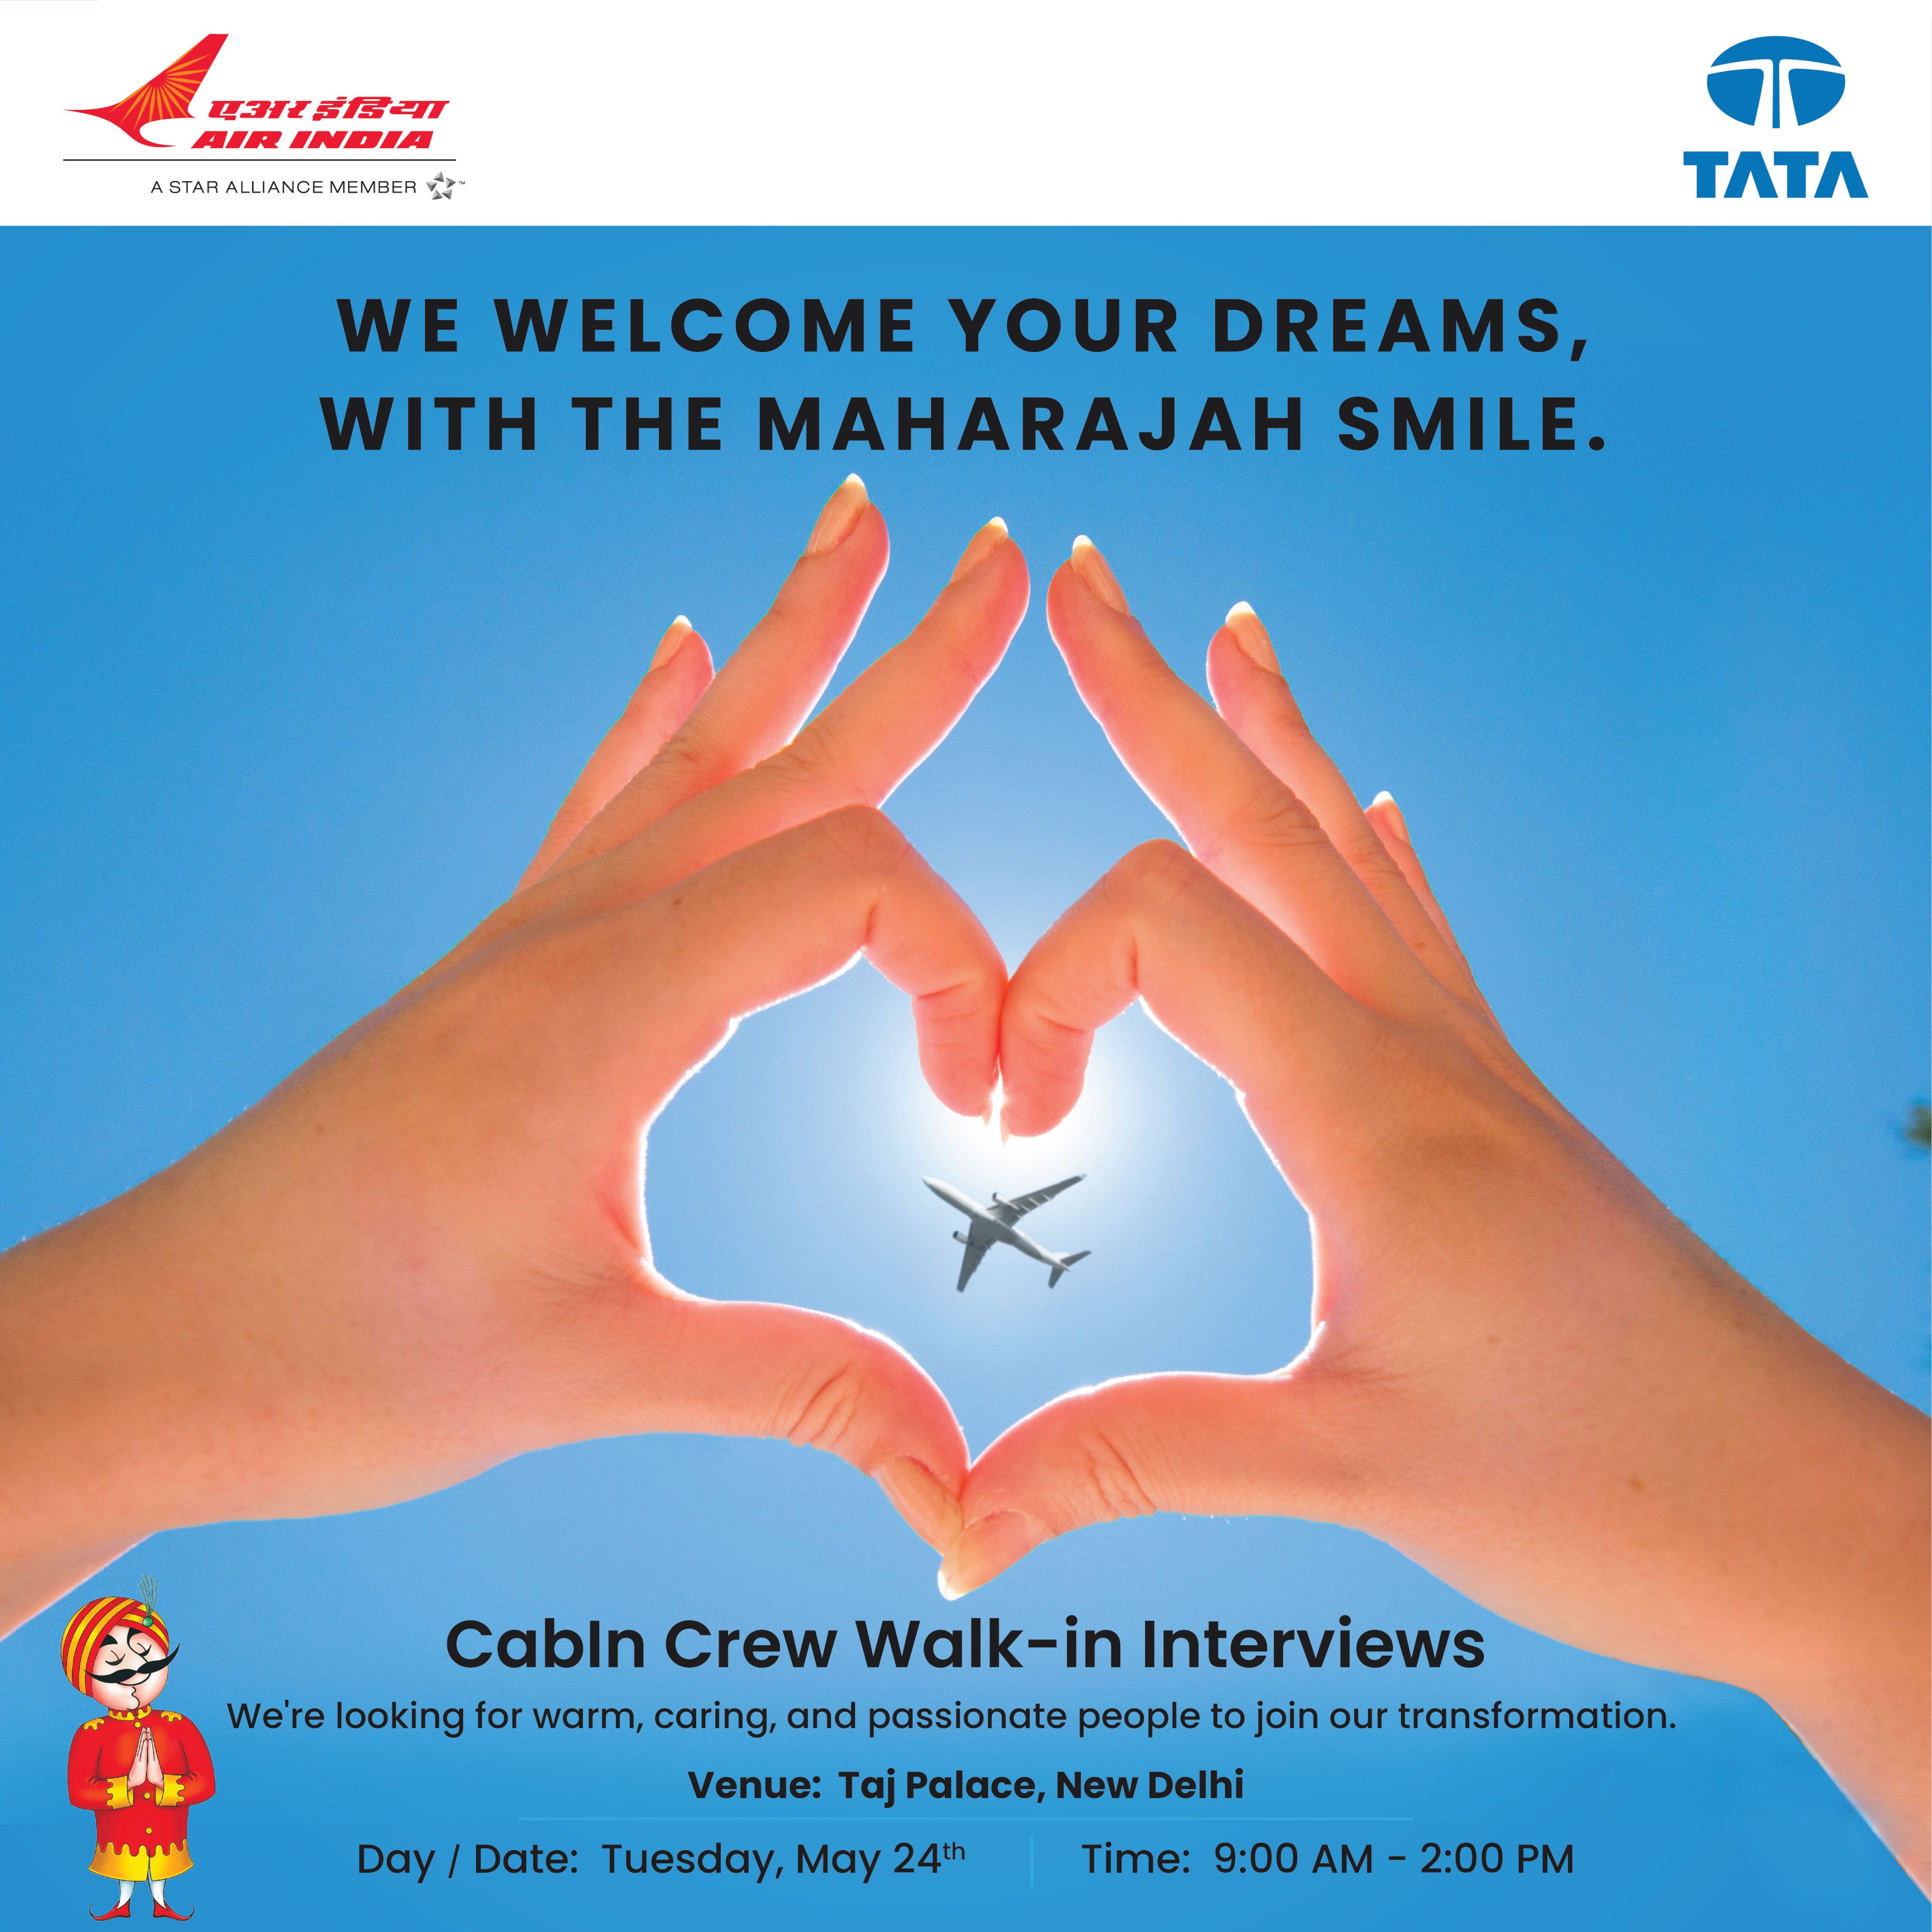 Job Alert ! Air  India  is  recruiting  for Cabin  Crews  (indian nationals)  for it's  India  operations .